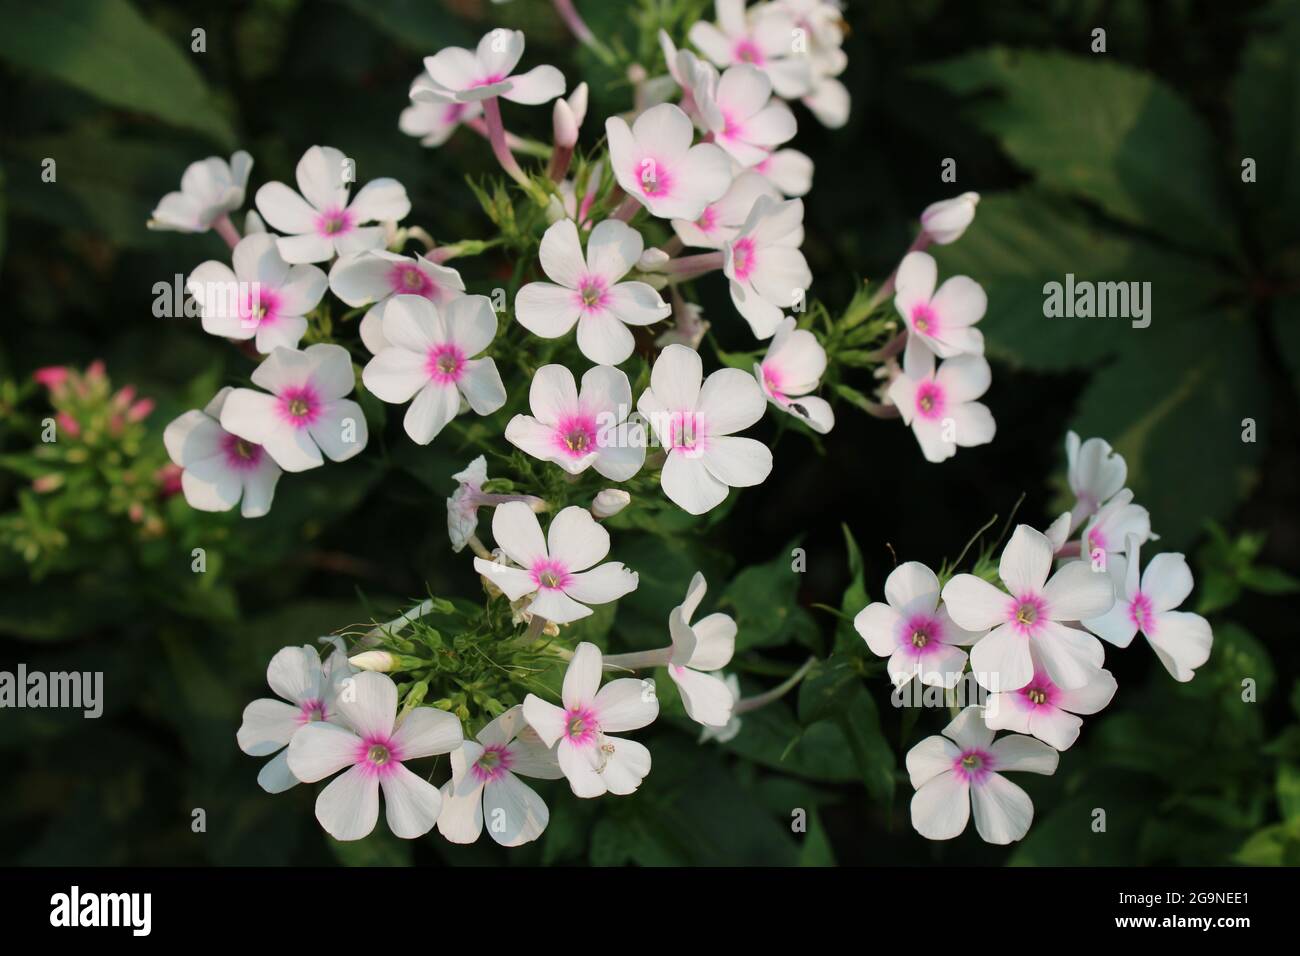 A Closeup on White Garden Phlox with Pink Centers Stock Photo